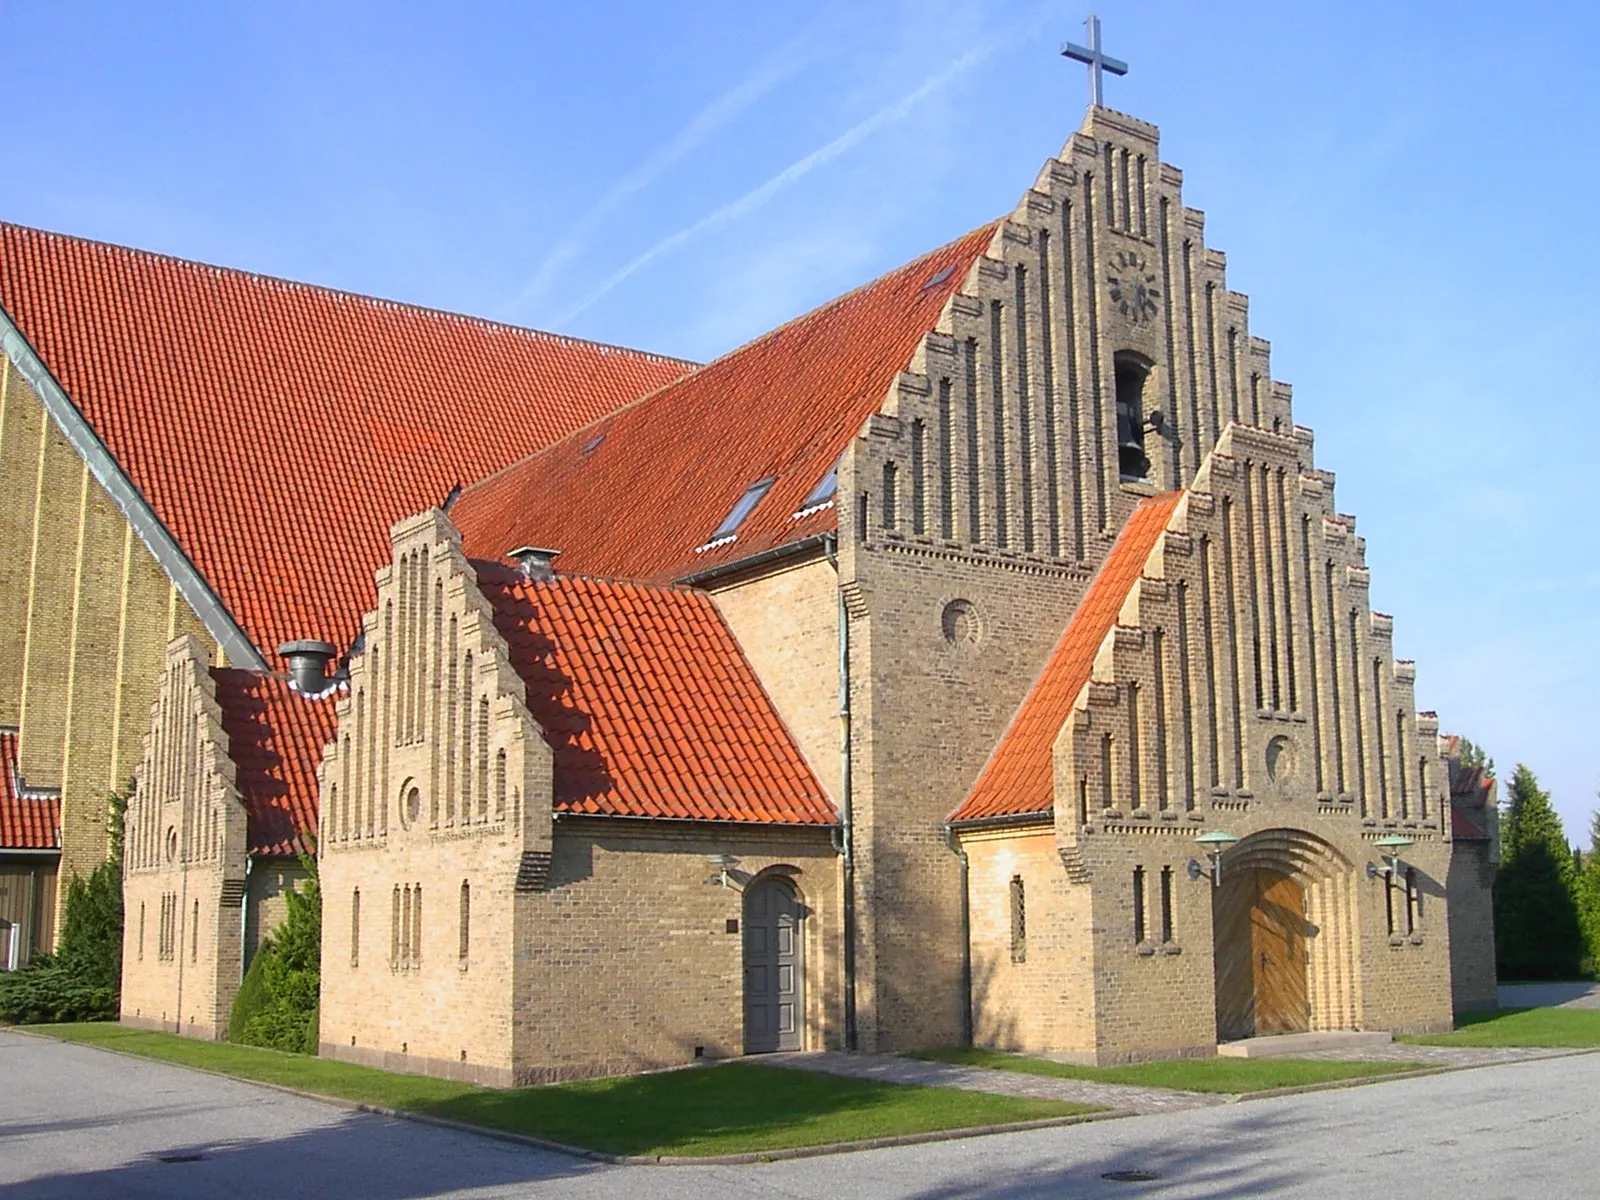 Photo showing: Christianskirken (Christians Church) in the city Fredericia in Denmark.

Source: Photo by --Rune Magnussen 5. Sep 2005